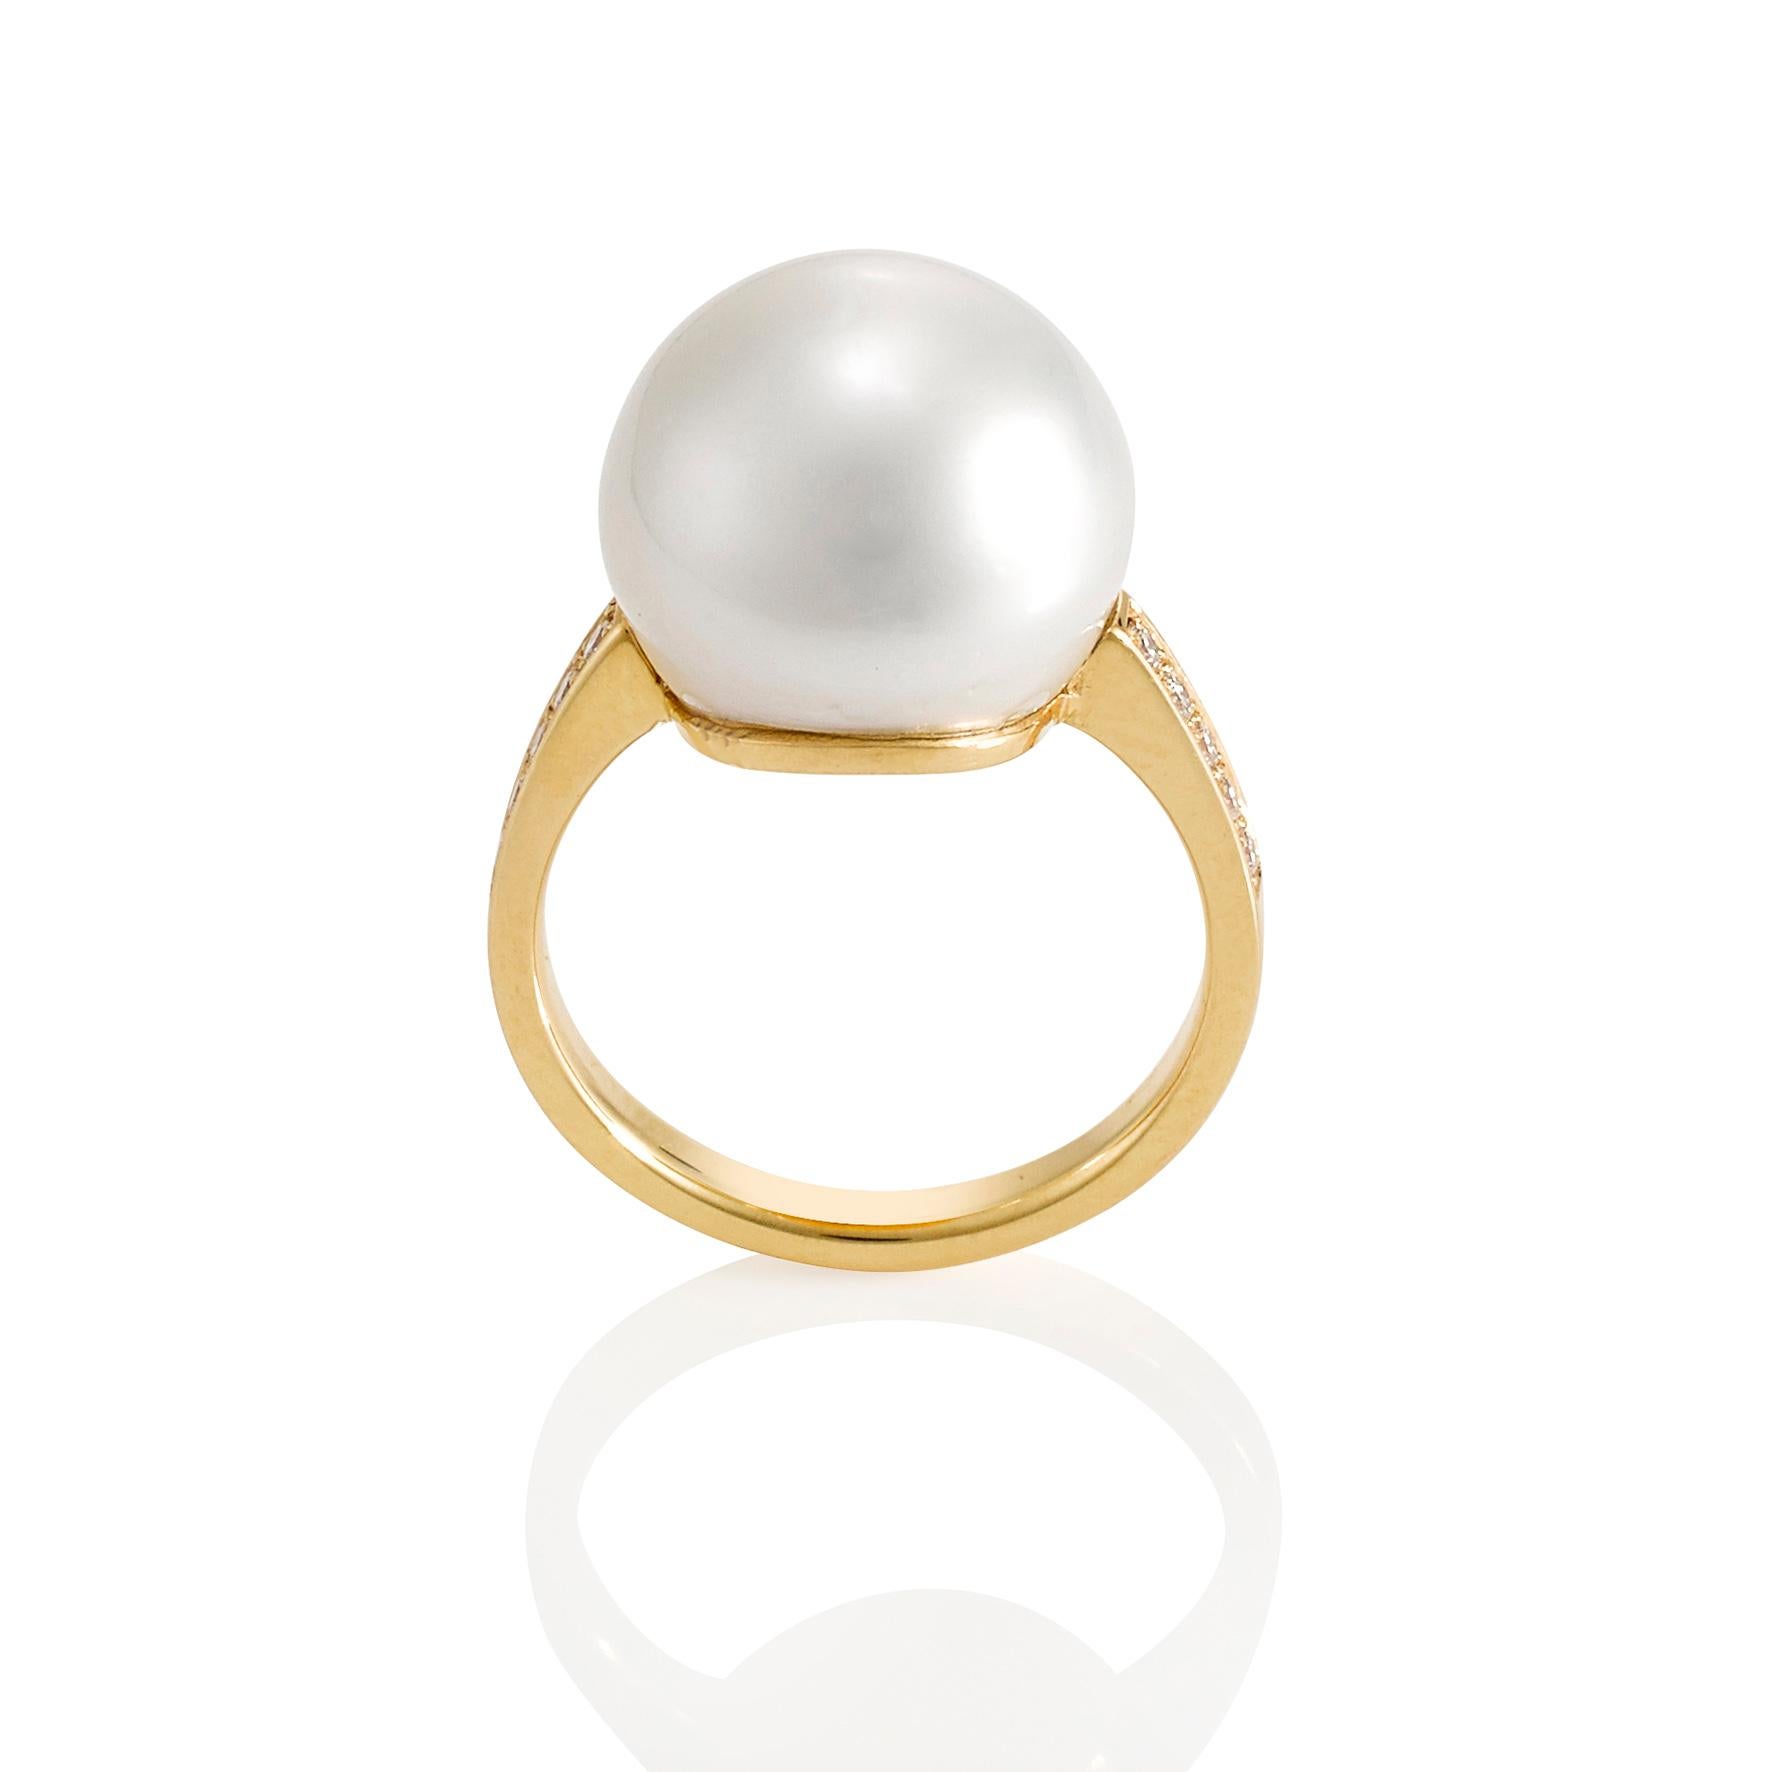 Giulians 18 karat Australian south sea pearl and diamond ring.  The ring features a 13.4mm cultured South Sea Pearl with a bright lustre.  The pearl has been hand carved to sit lower on the finger.  The parallel band has been theadset with 12 round